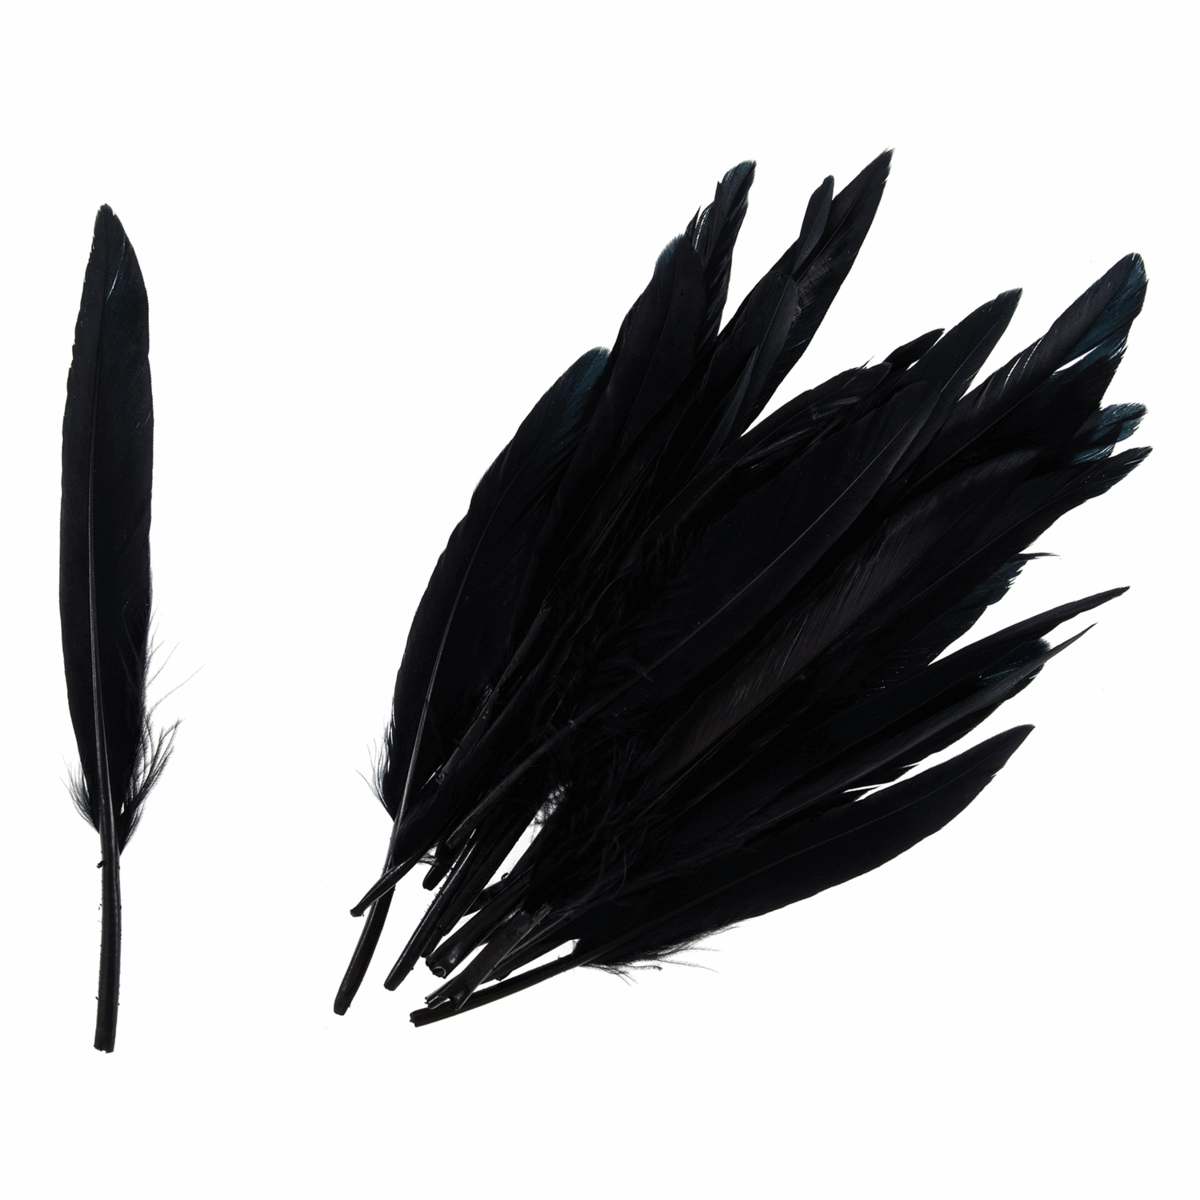 Trimits Duck Feathers - Black (Pack of 24)